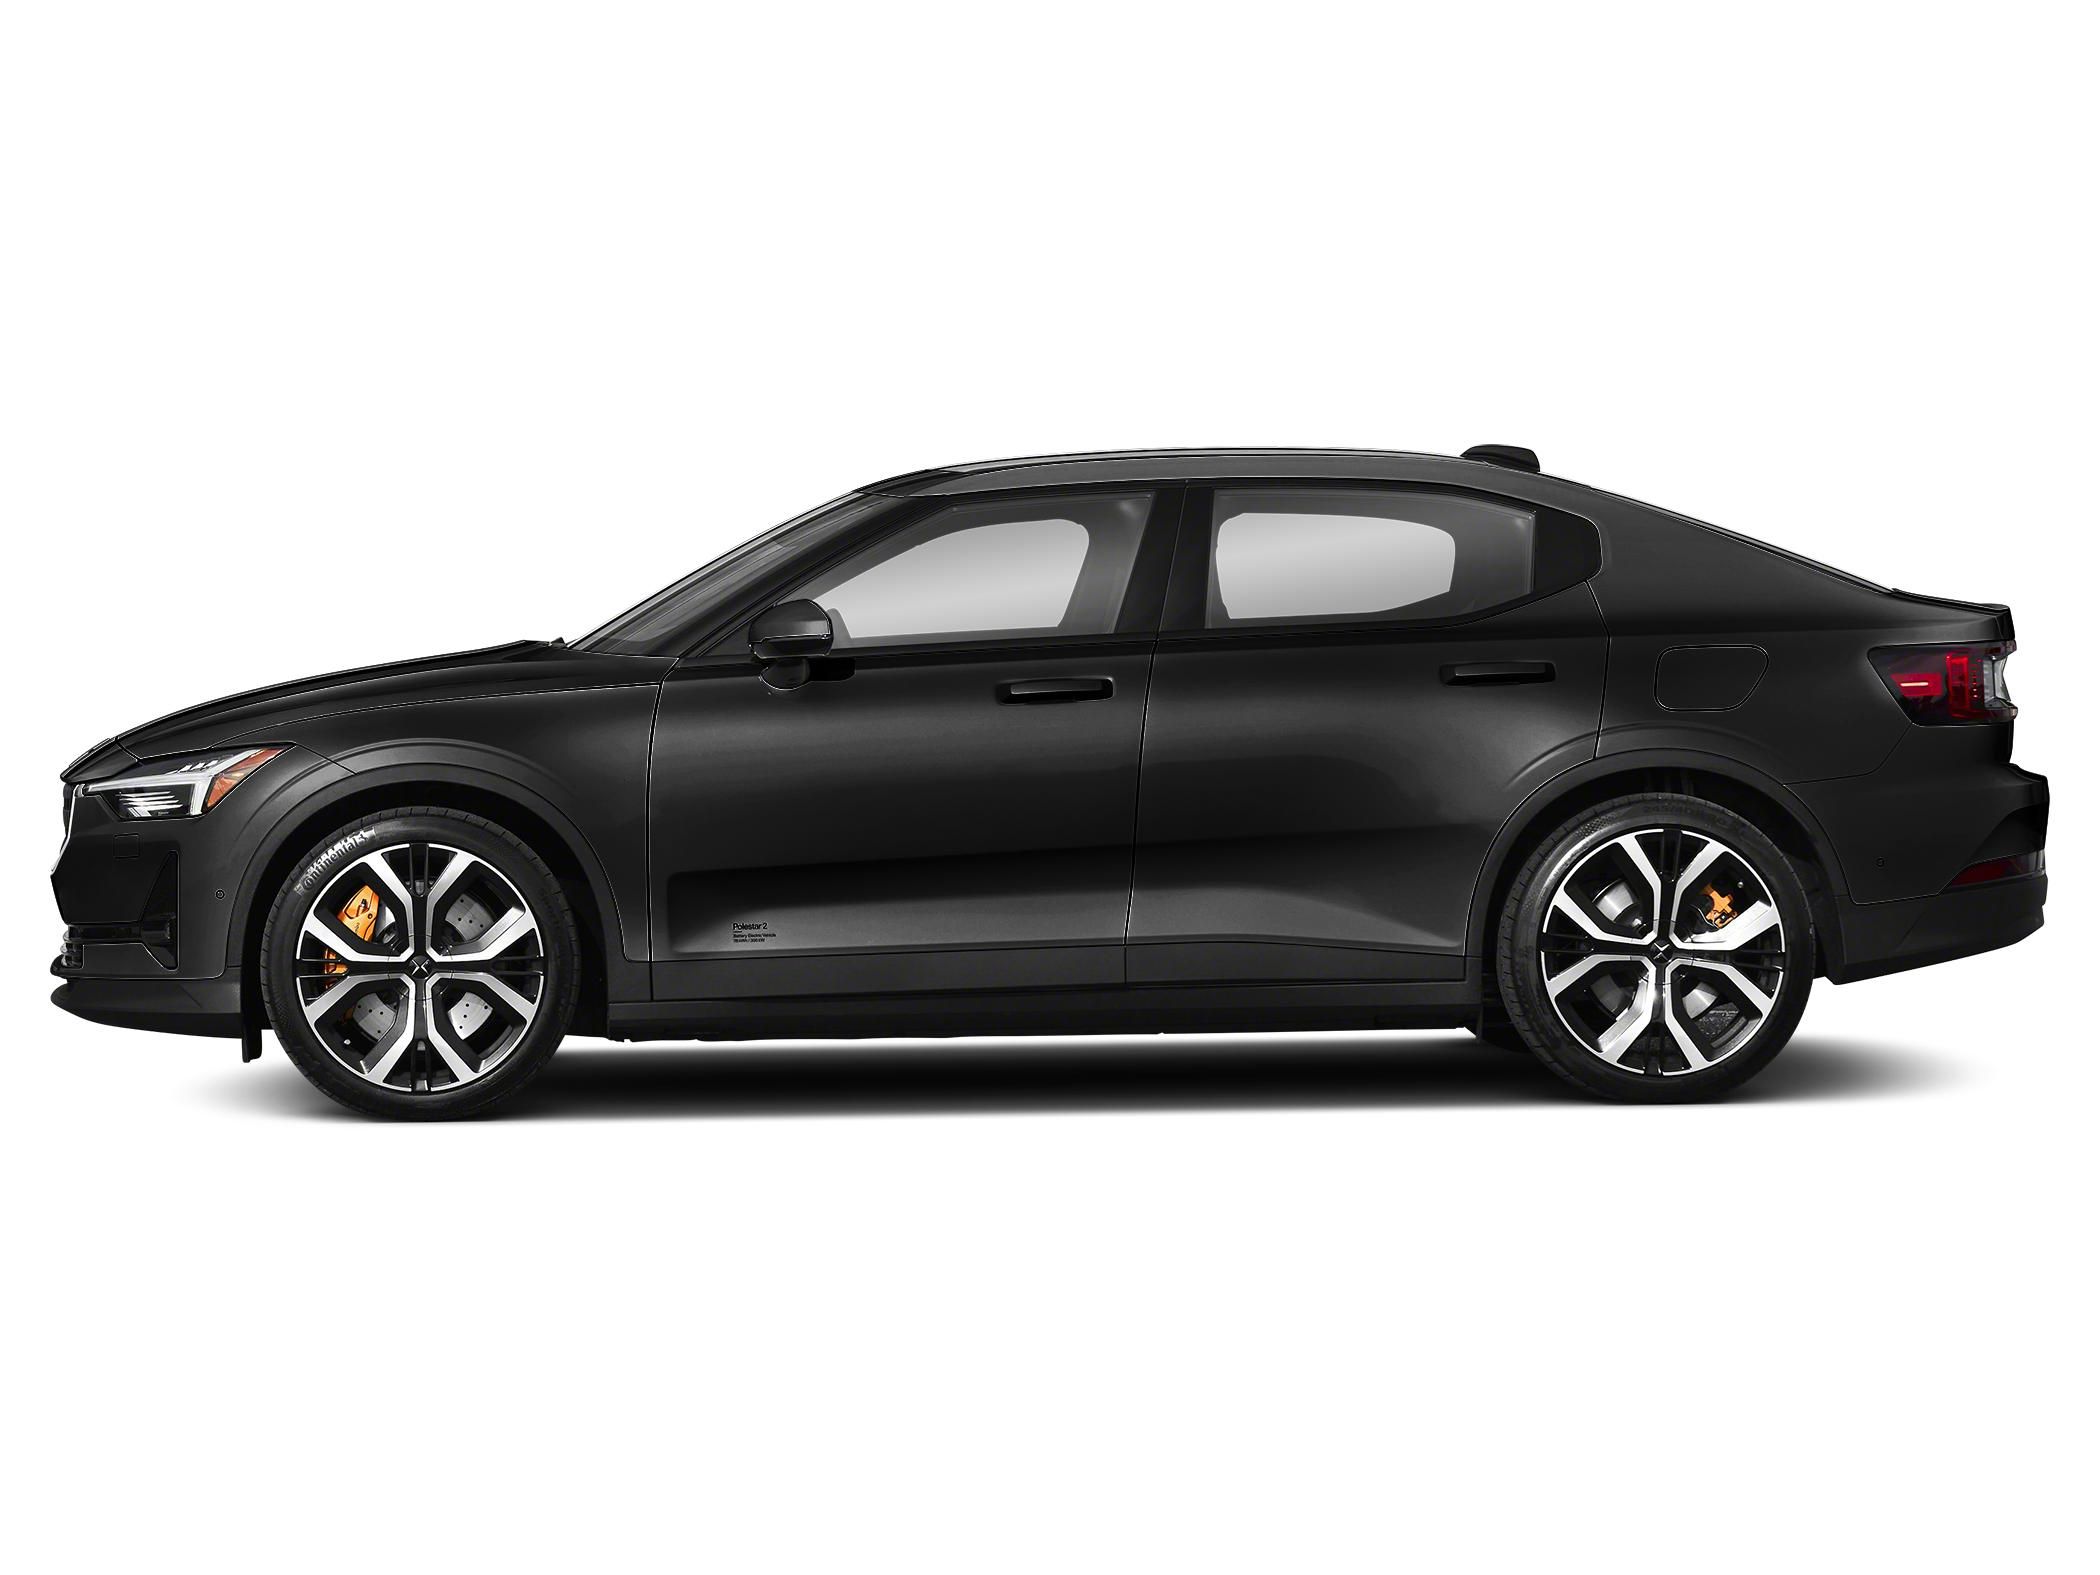 2021 Polestar 2 Reviews, Price, MPG and More